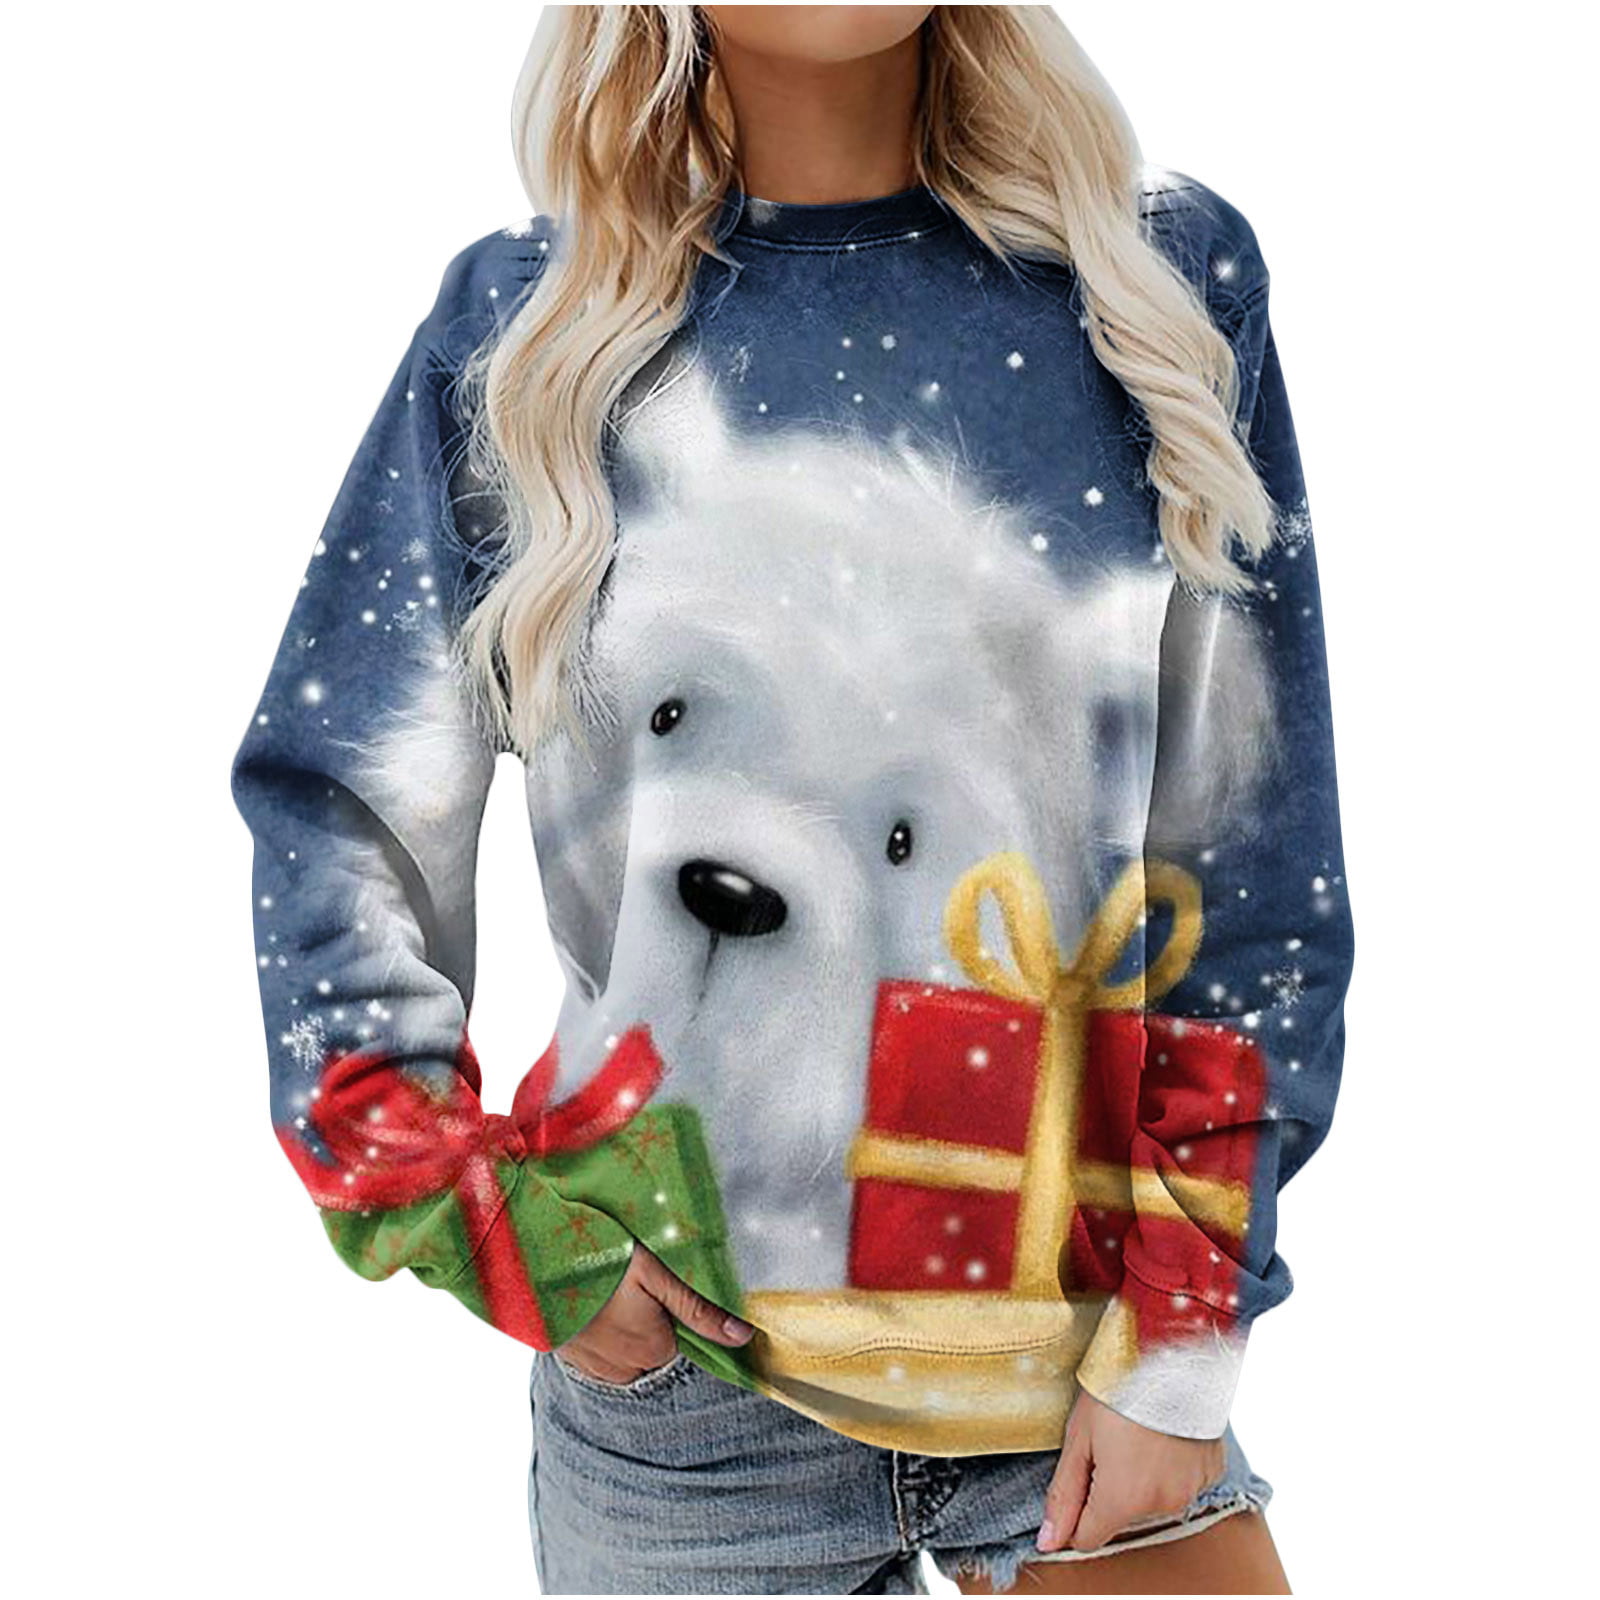 GBSELL Ugly Christmas Sweatshirts for Women,Merry Christmas Fall Clothes Funny Snowman Santa Pullover Tops 